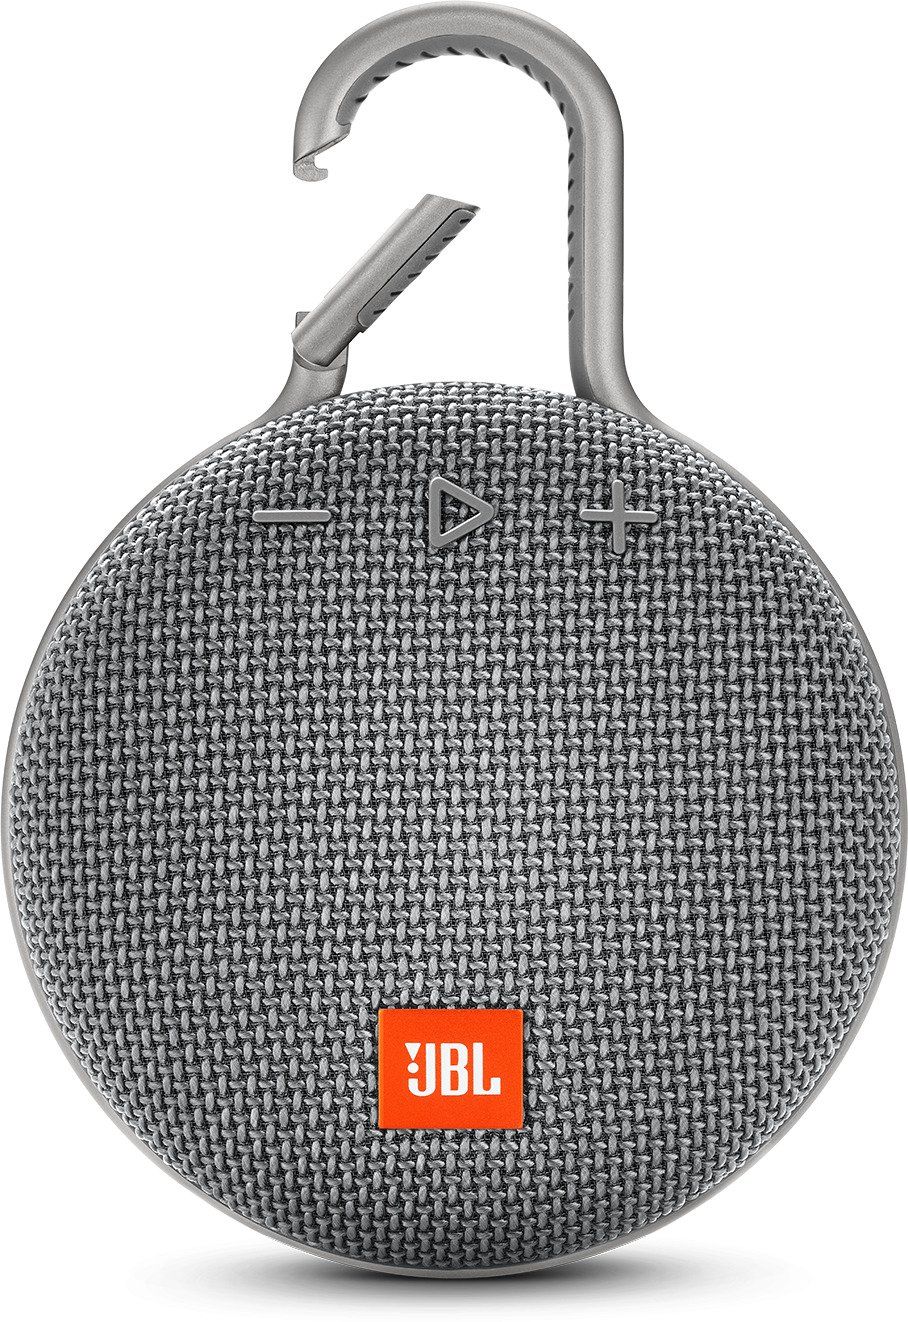 JBL Clip 2 IPX7 Bluetooth Speaker | Academy Sports + Outdoor Affiliate